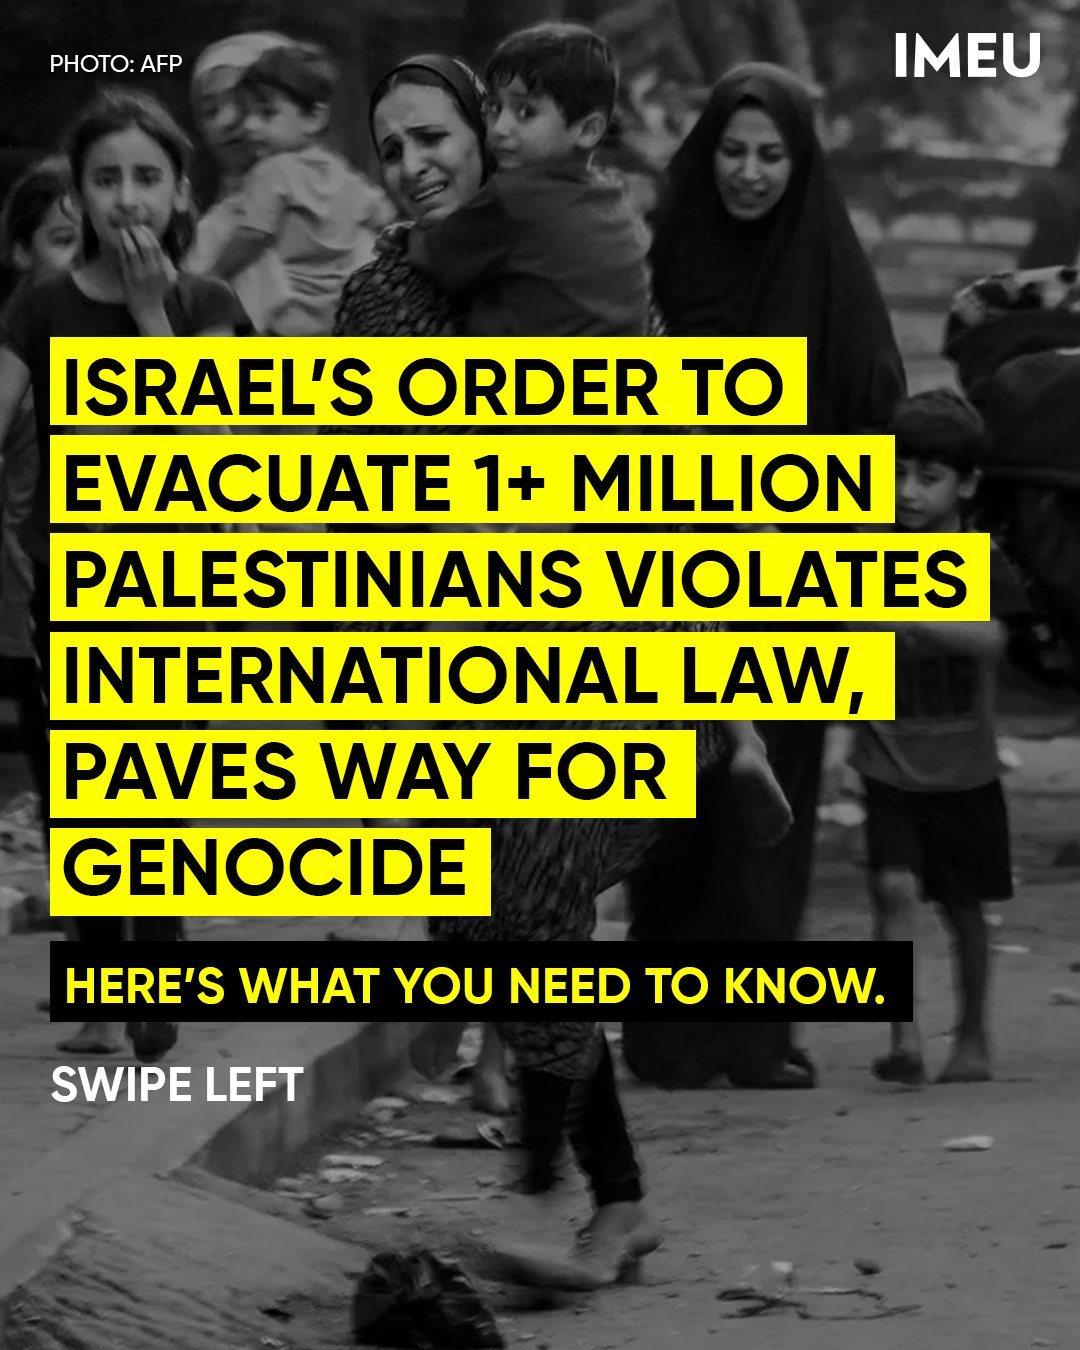 Israel’s 24-hour evacuation order for 1.1+ million Palestinians in north Gaza isn’t just impos...jpg